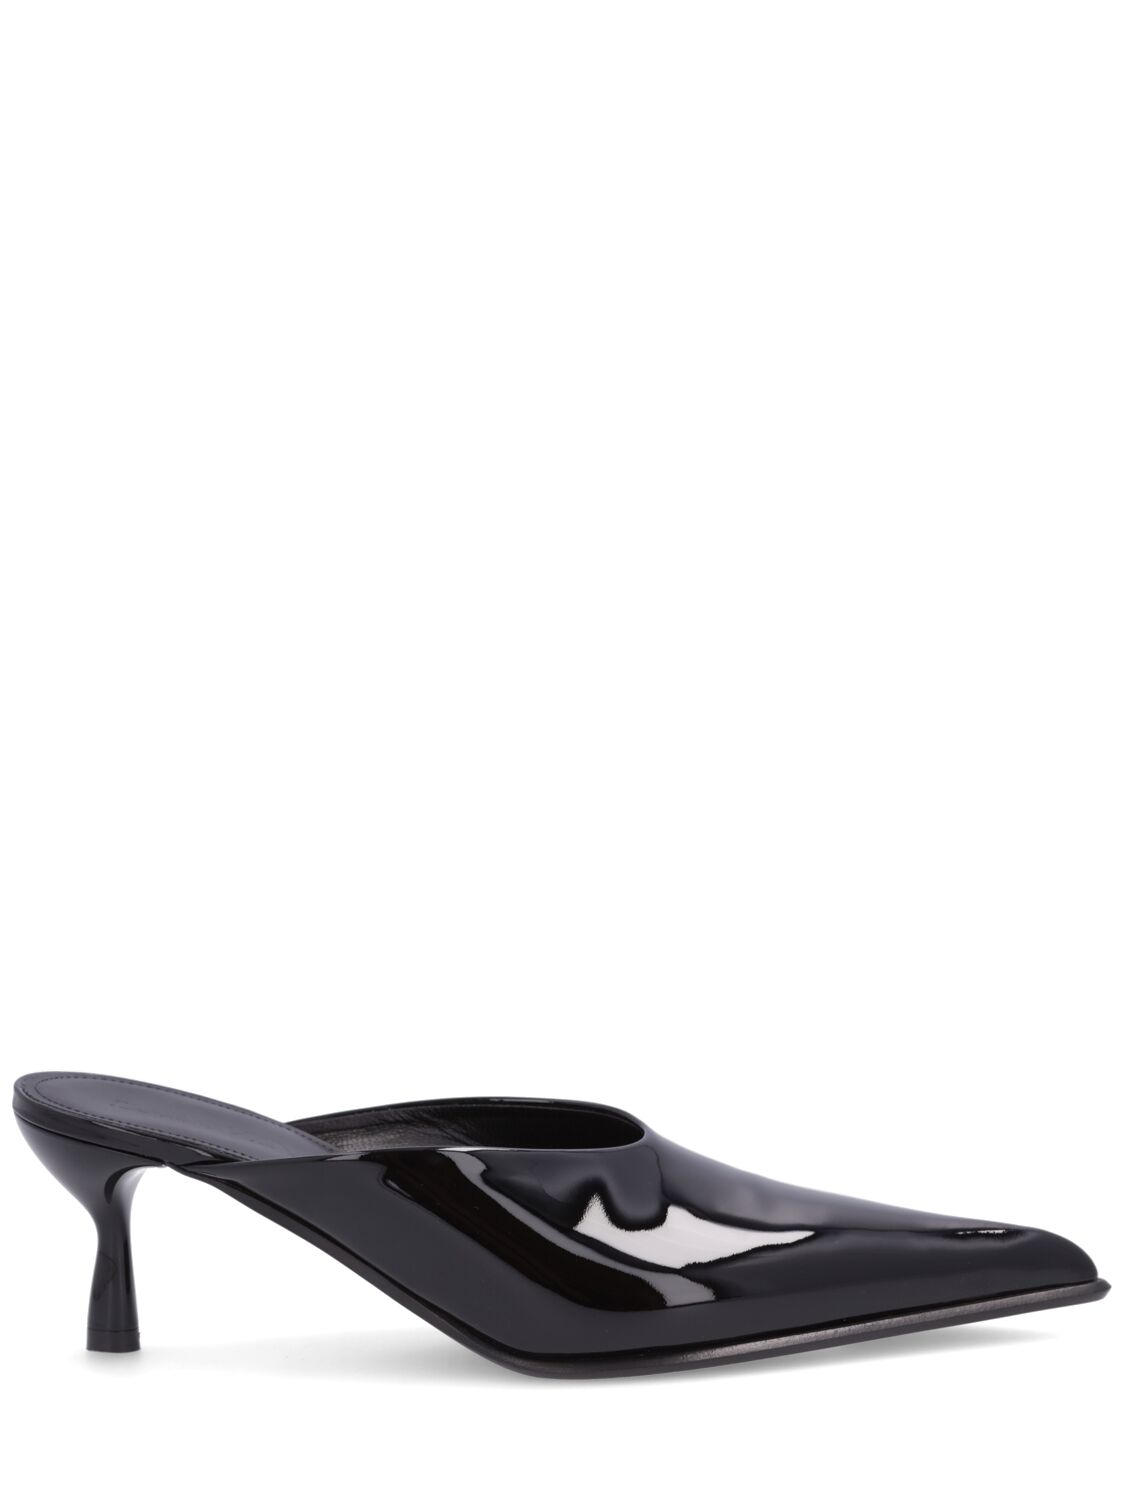 Lanvin 60mm Patent Leather Mules In Black